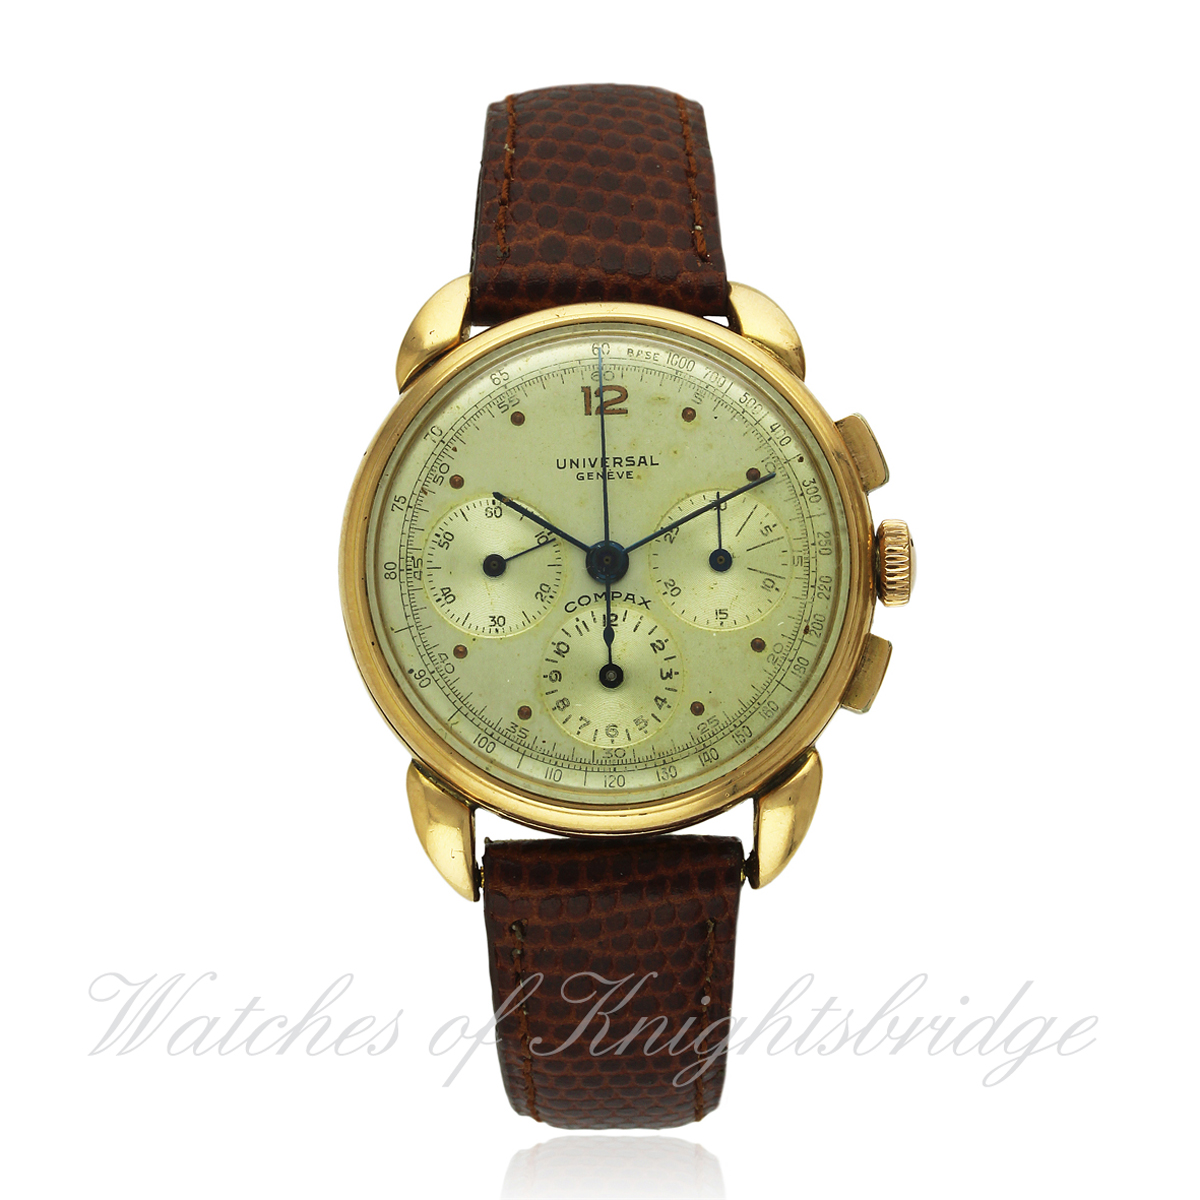 A GENTLEMAN`S 18K SOLID PINK GOLD UNIVERSAL GENEVE COMPAX CHRONOGRAPH WRIST WATCH DATED 1944 FROM